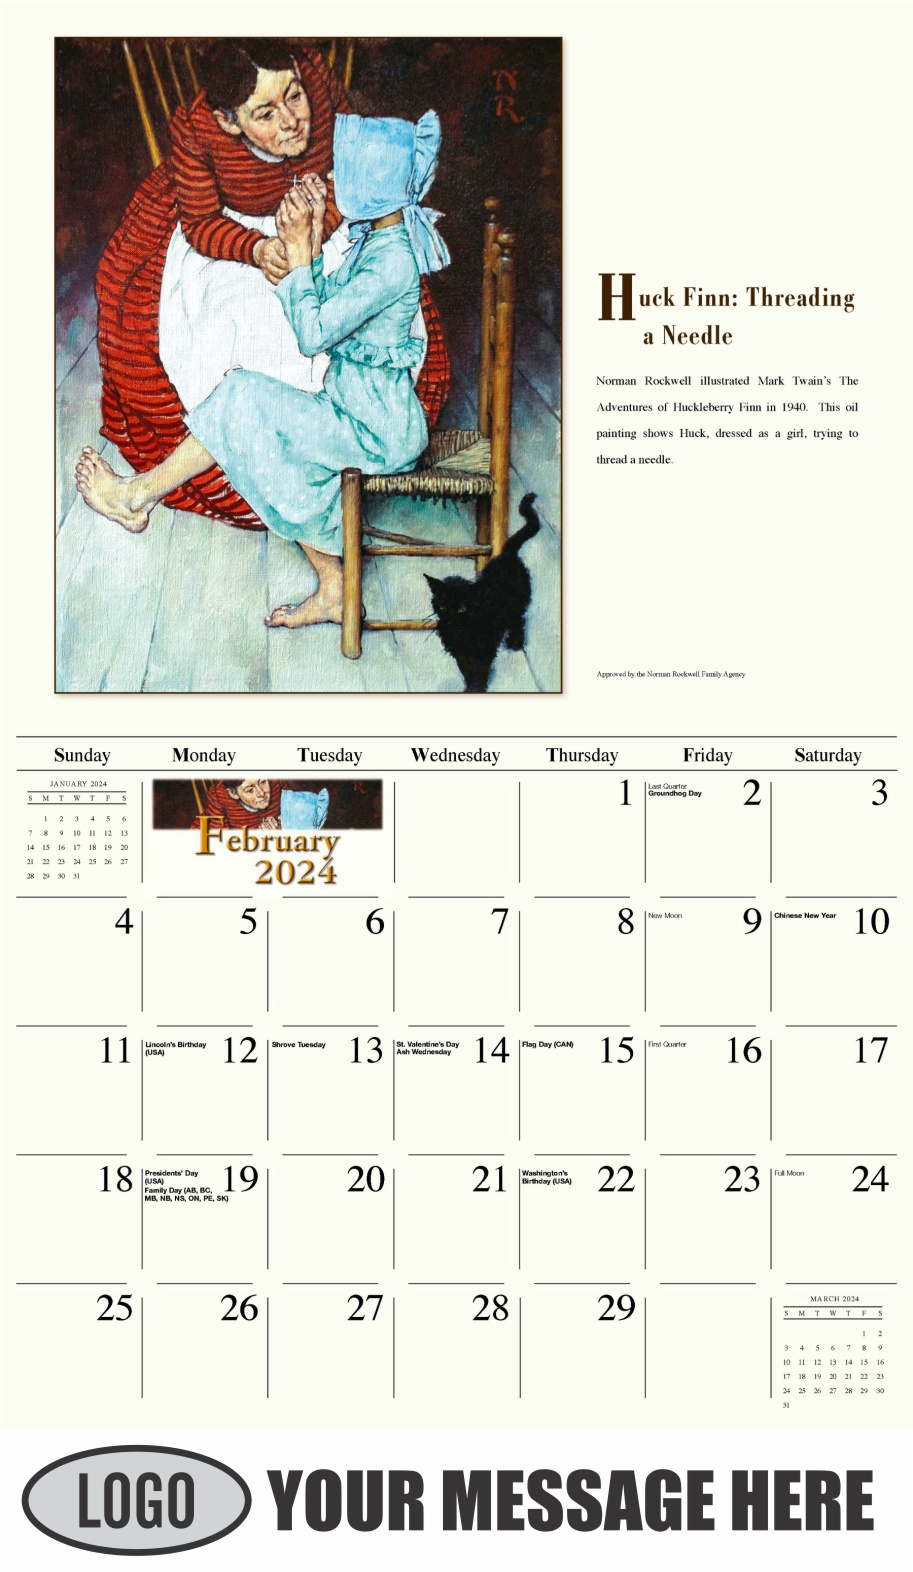 Memorable Images by Norman Rockwell 2024 Business Promotional Wall Calendar - February